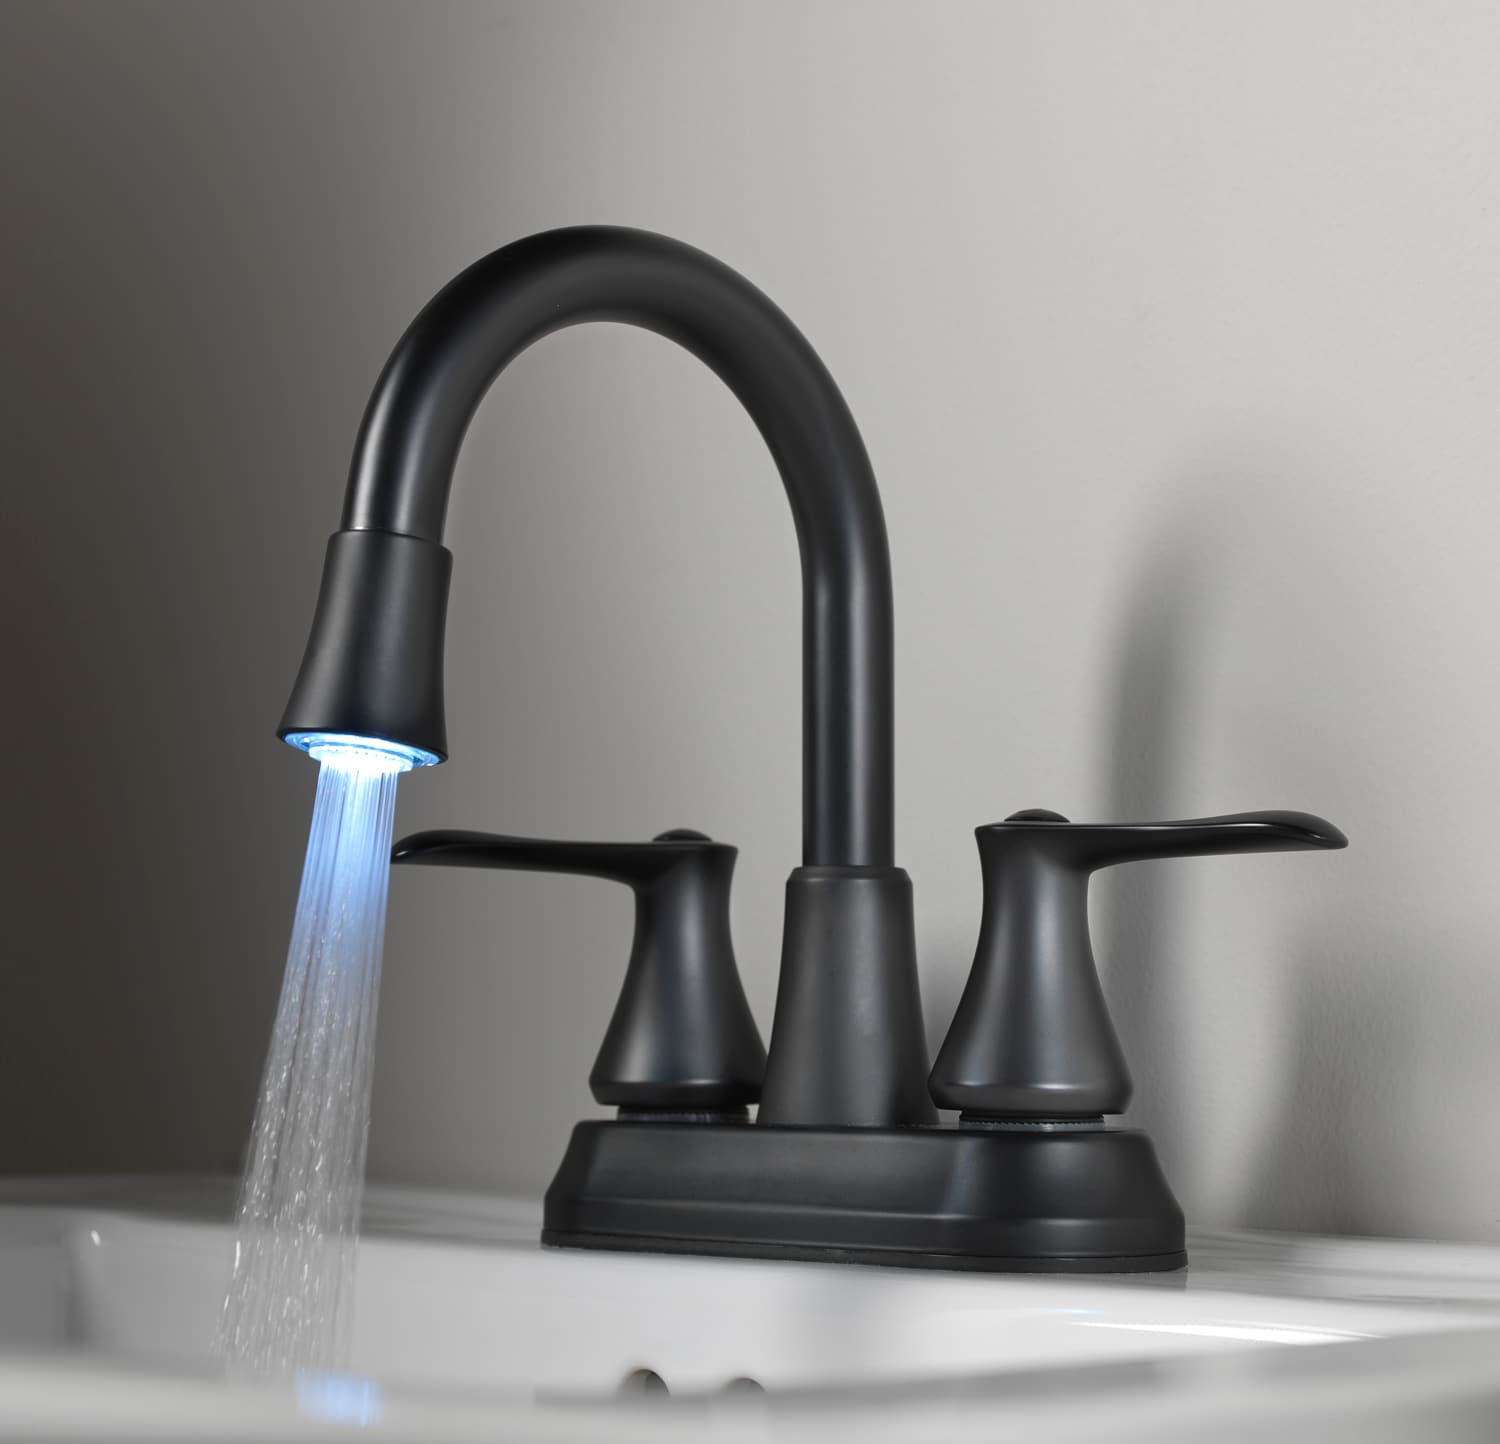 This Dripping Faucet Spigot Night Light Makes It Look Like It's